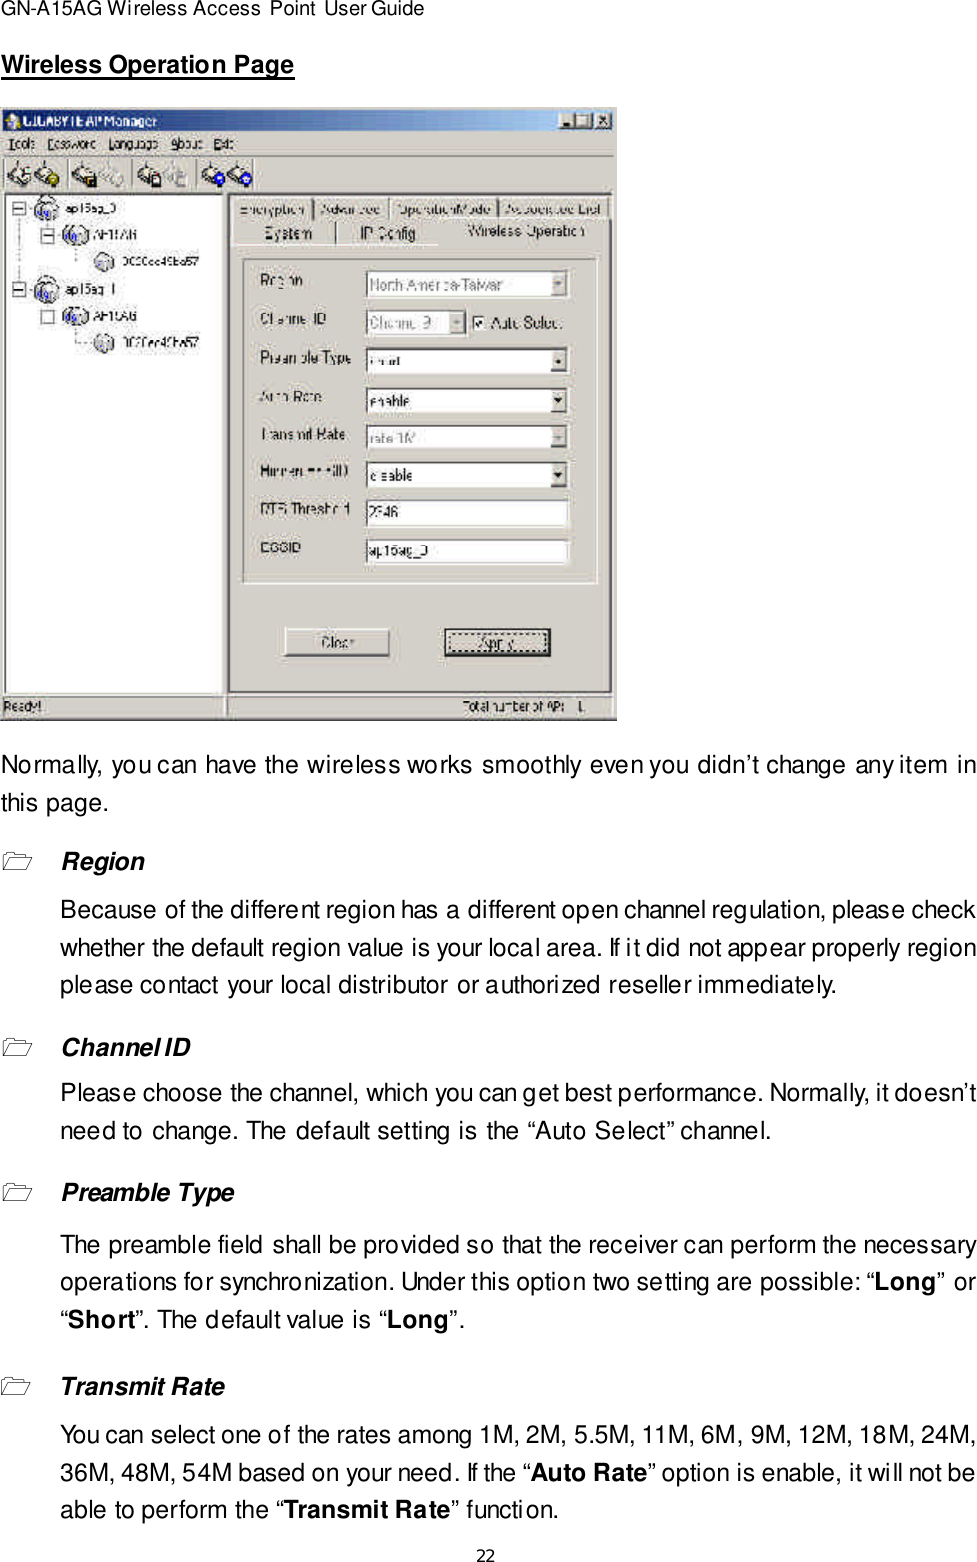 22GN-A15AG Wireless Access Point User GuideWireless Operation PageNormally, you can have the wireless works smoothly even you didn’t change any item inthis page.1RegionBecause of the different region has a different open channel regulation, please checkwhether the default region value is your local area. If it did not appear properly regionplease contact your local distributor or authorized reseller immediately.1Channel IDPlease choose the channel, which you can get best performance. Normally, it doesn’tneed to change. The default setting is the “Auto Select” channel.1Preamble TypeThe preamble field shall be provided so that the receiver can perform the necessaryoperations for synchronization. Under this option two setting are possible: “Long” or“Short”. The default value is “Long”.1Transmit RateYou can select one of the rates among 1M, 2M, 5.5M, 11M, 6M, 9M, 12M, 18M, 24M,36M, 48M, 54M based on your need. If the “Auto Rate” option is enable, it will not beable to perform the “Transmit Rate” function.